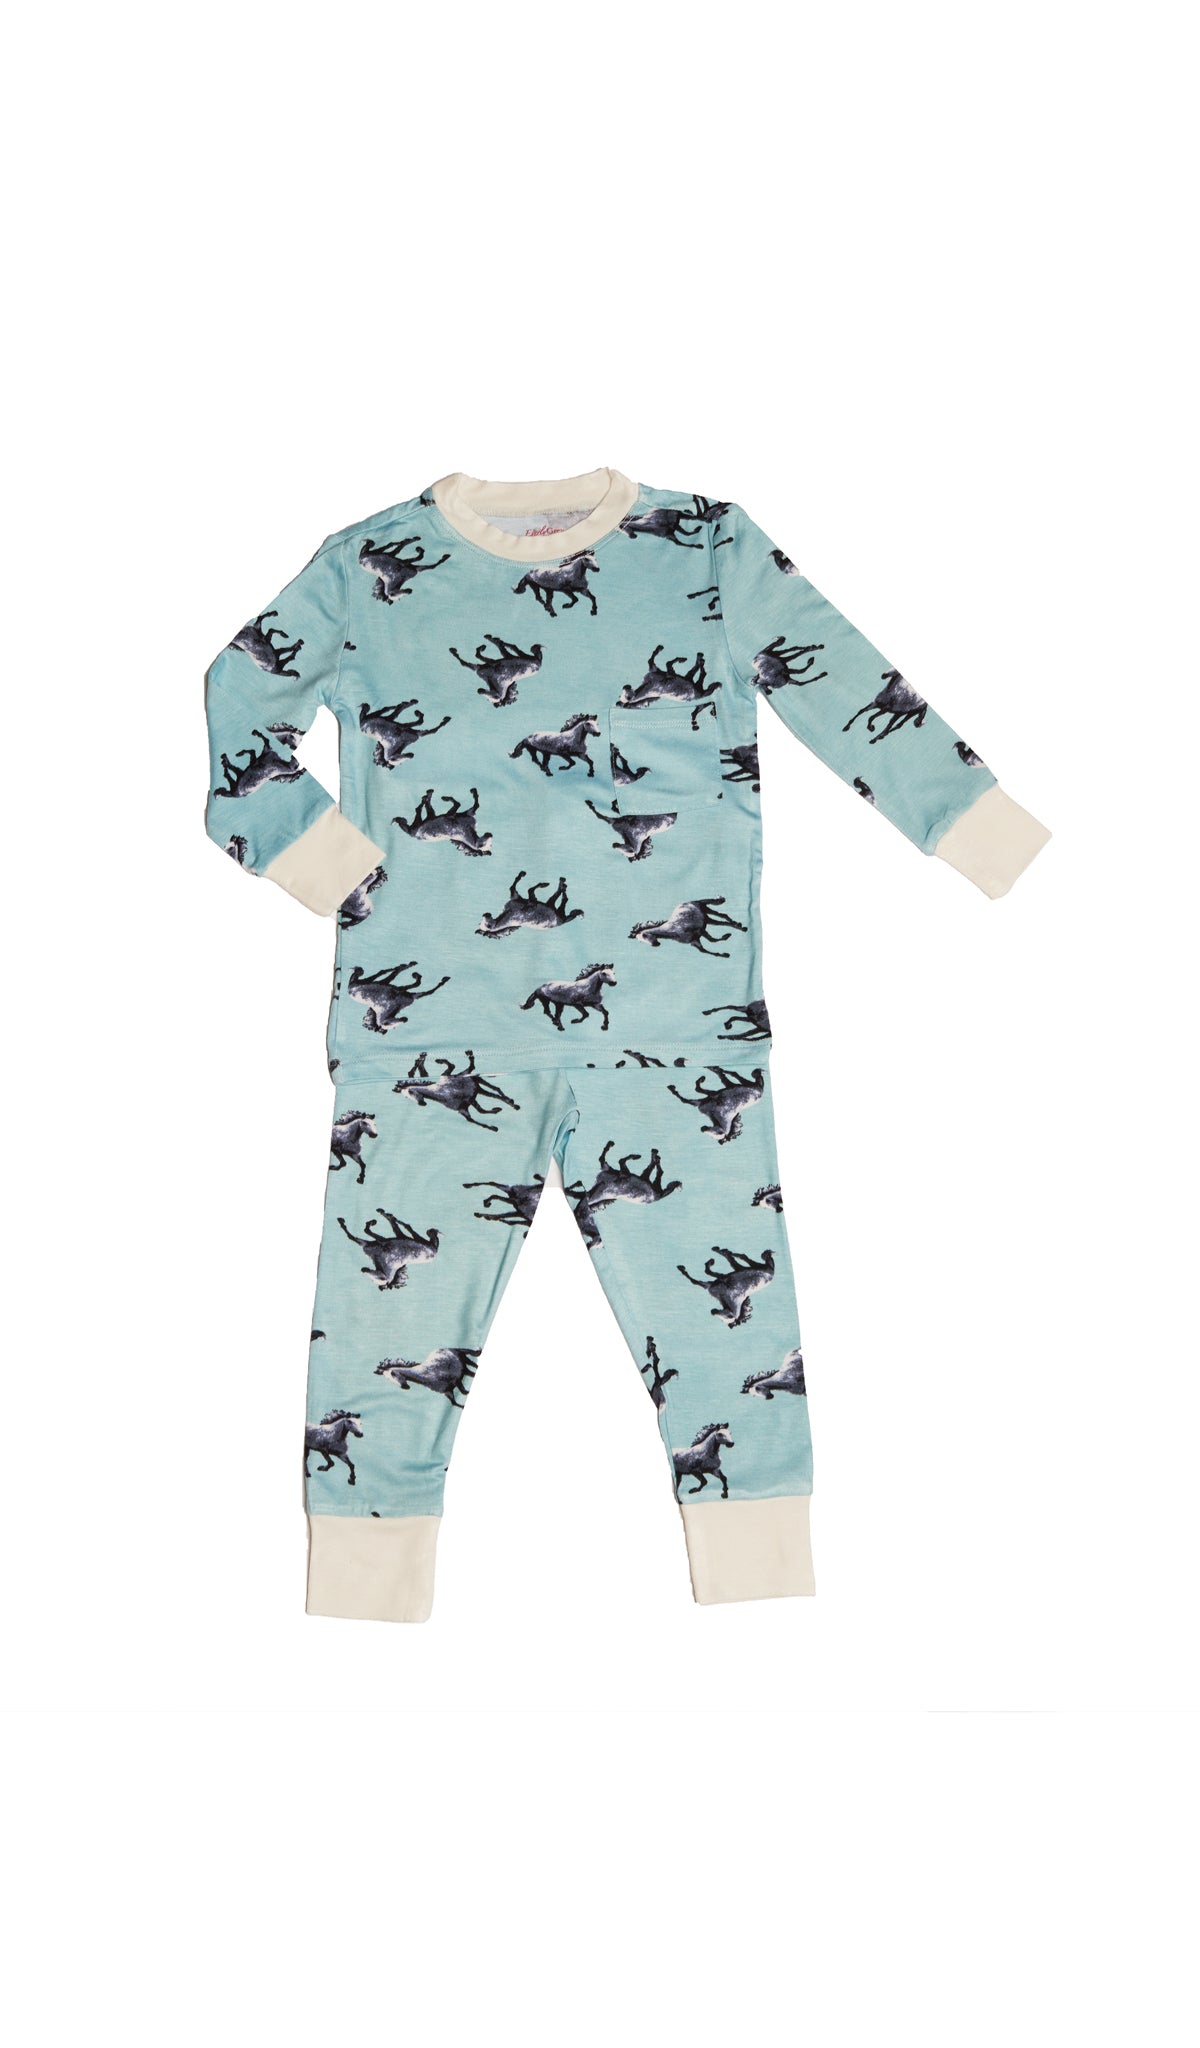 Horse Emerson Kids 2-Piece Pant PJ. Long sleeve top with cuff trim and long pant with cuff trim.